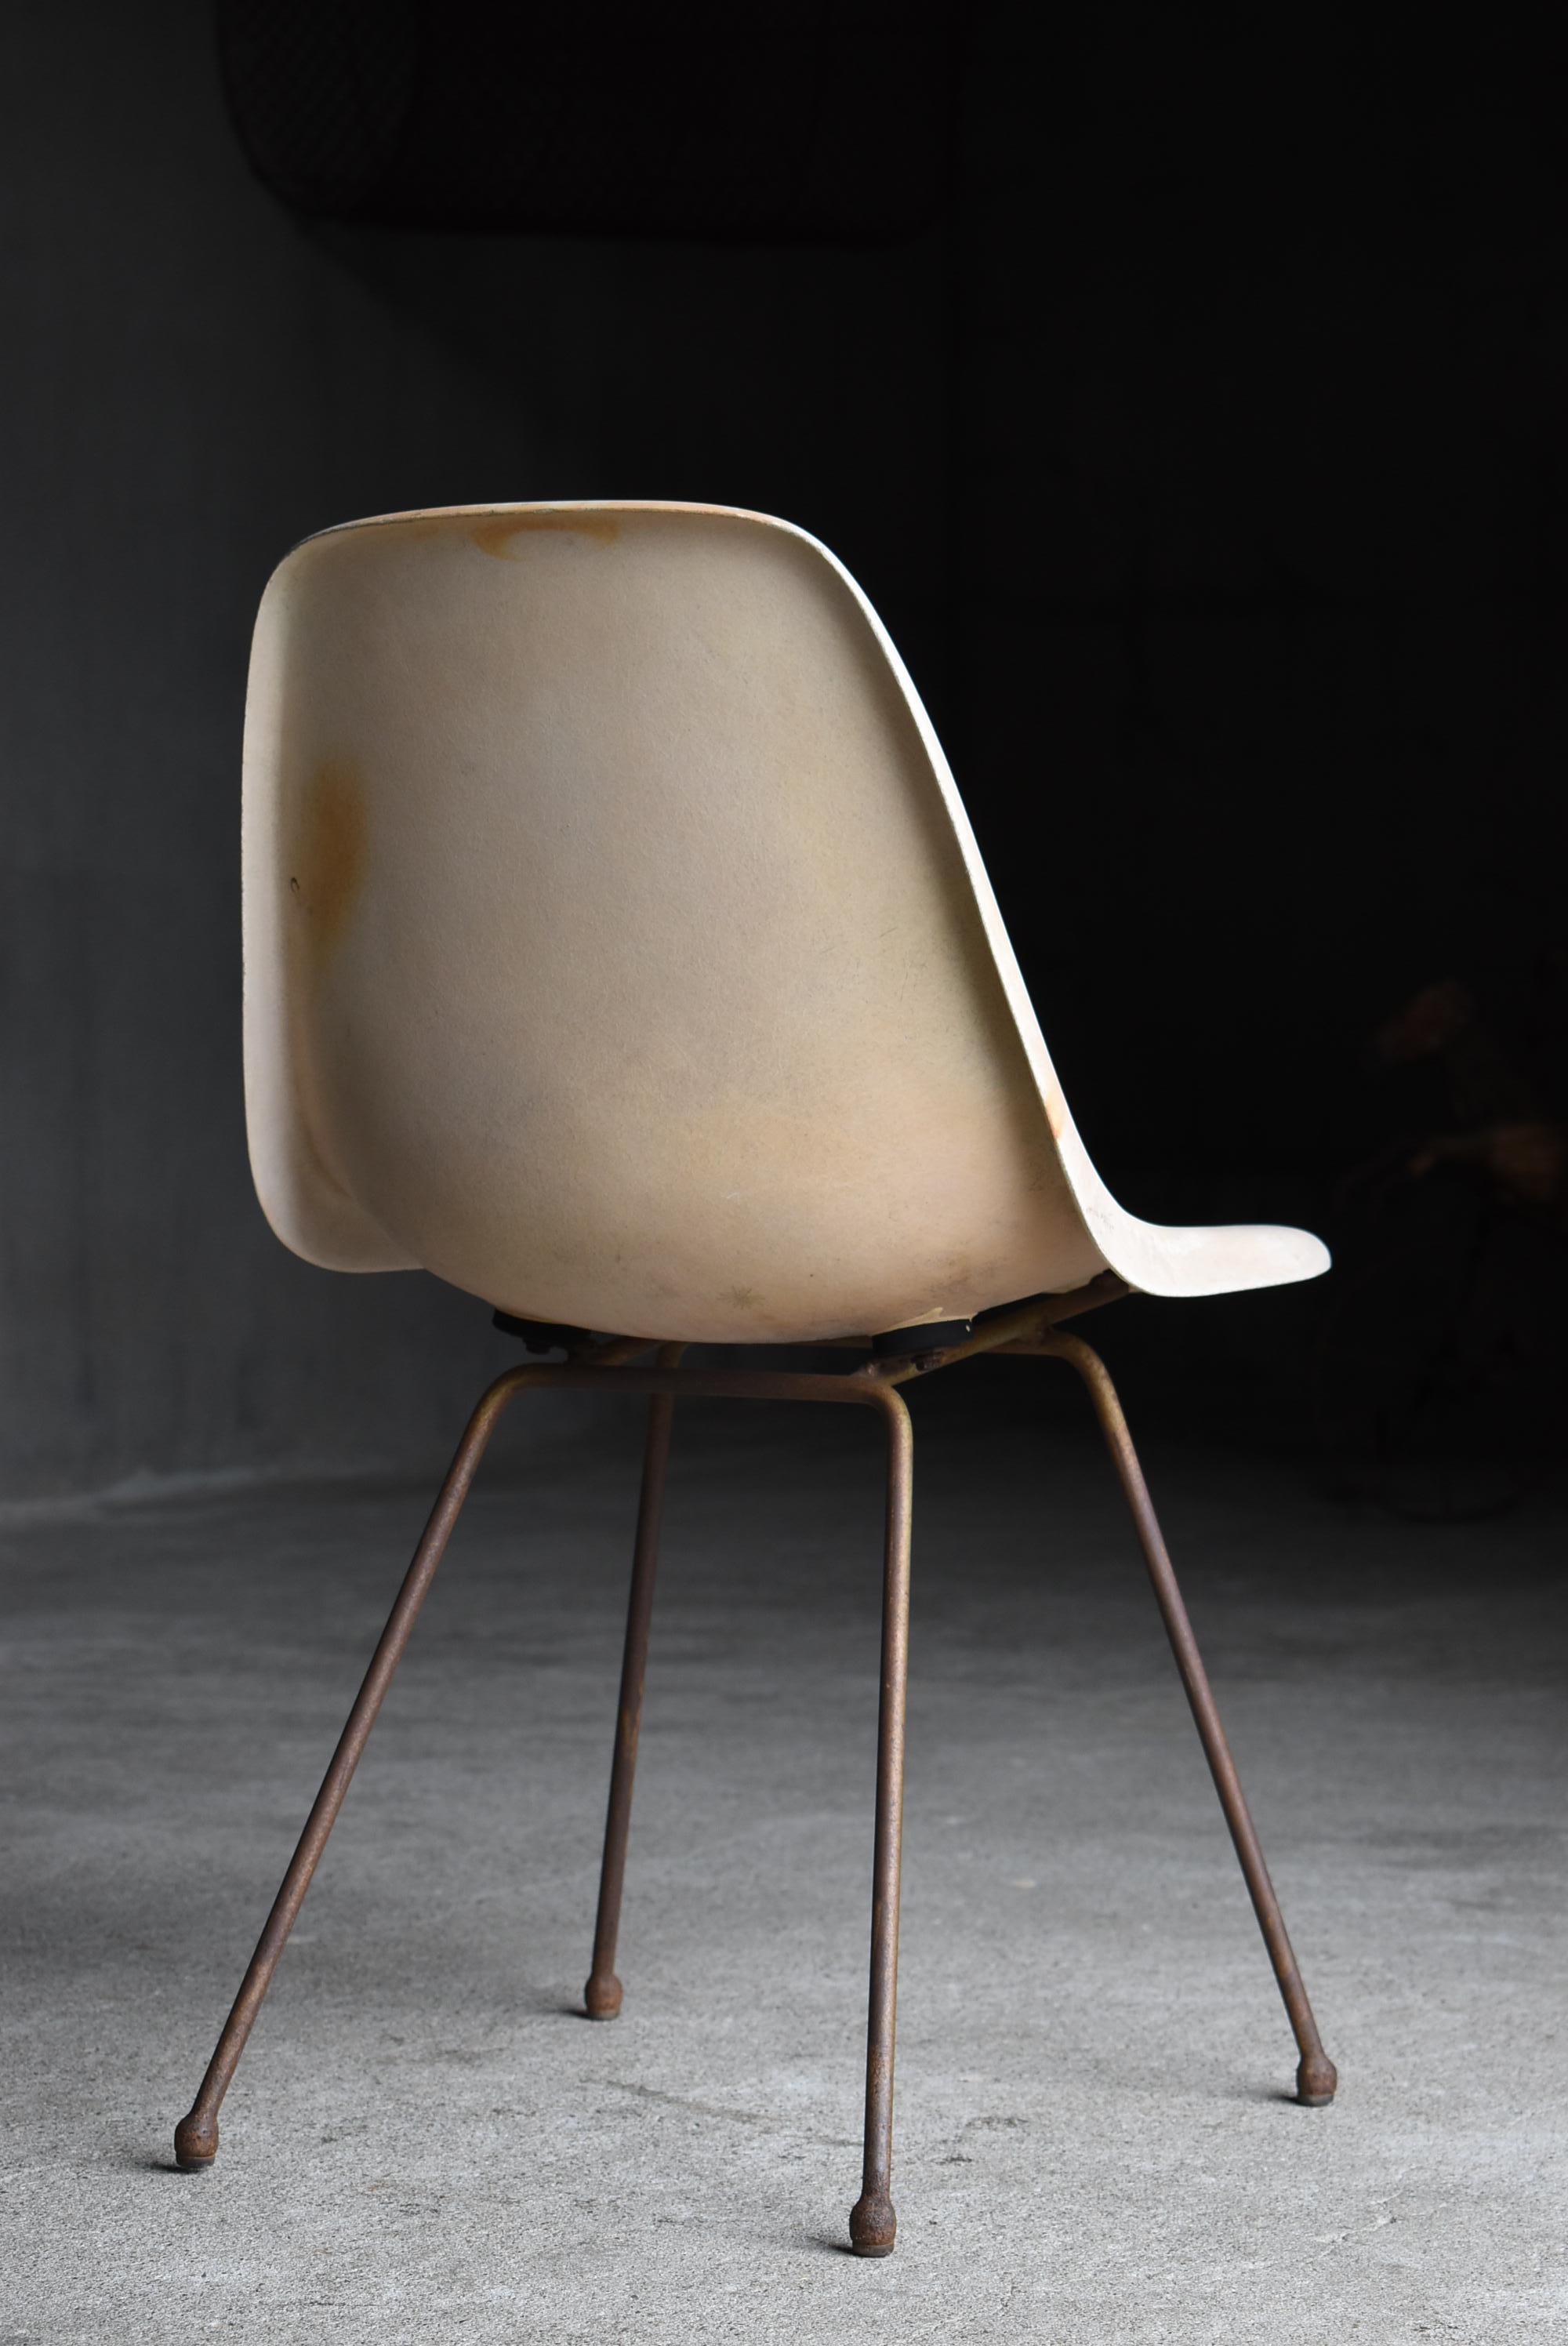 Japanese Old Modern Chair Mid-Century 1940s-1960s  For Sale 4